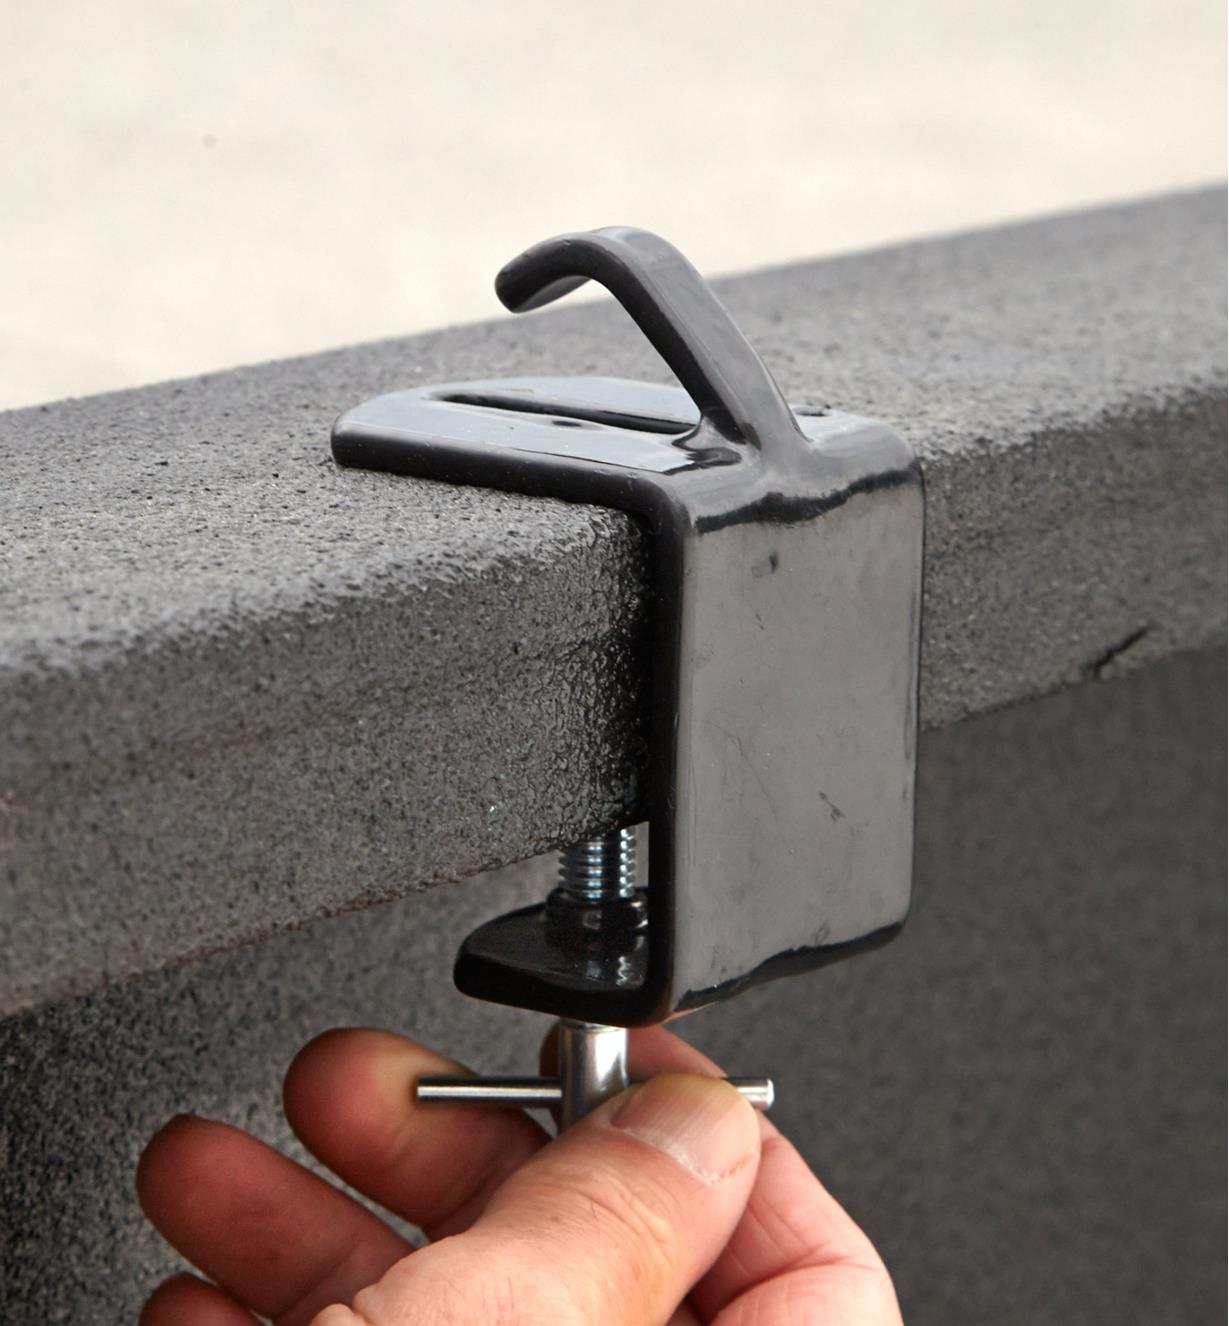 Tightening the clamping screw on a tie-down anchor to secure it to a truck rail